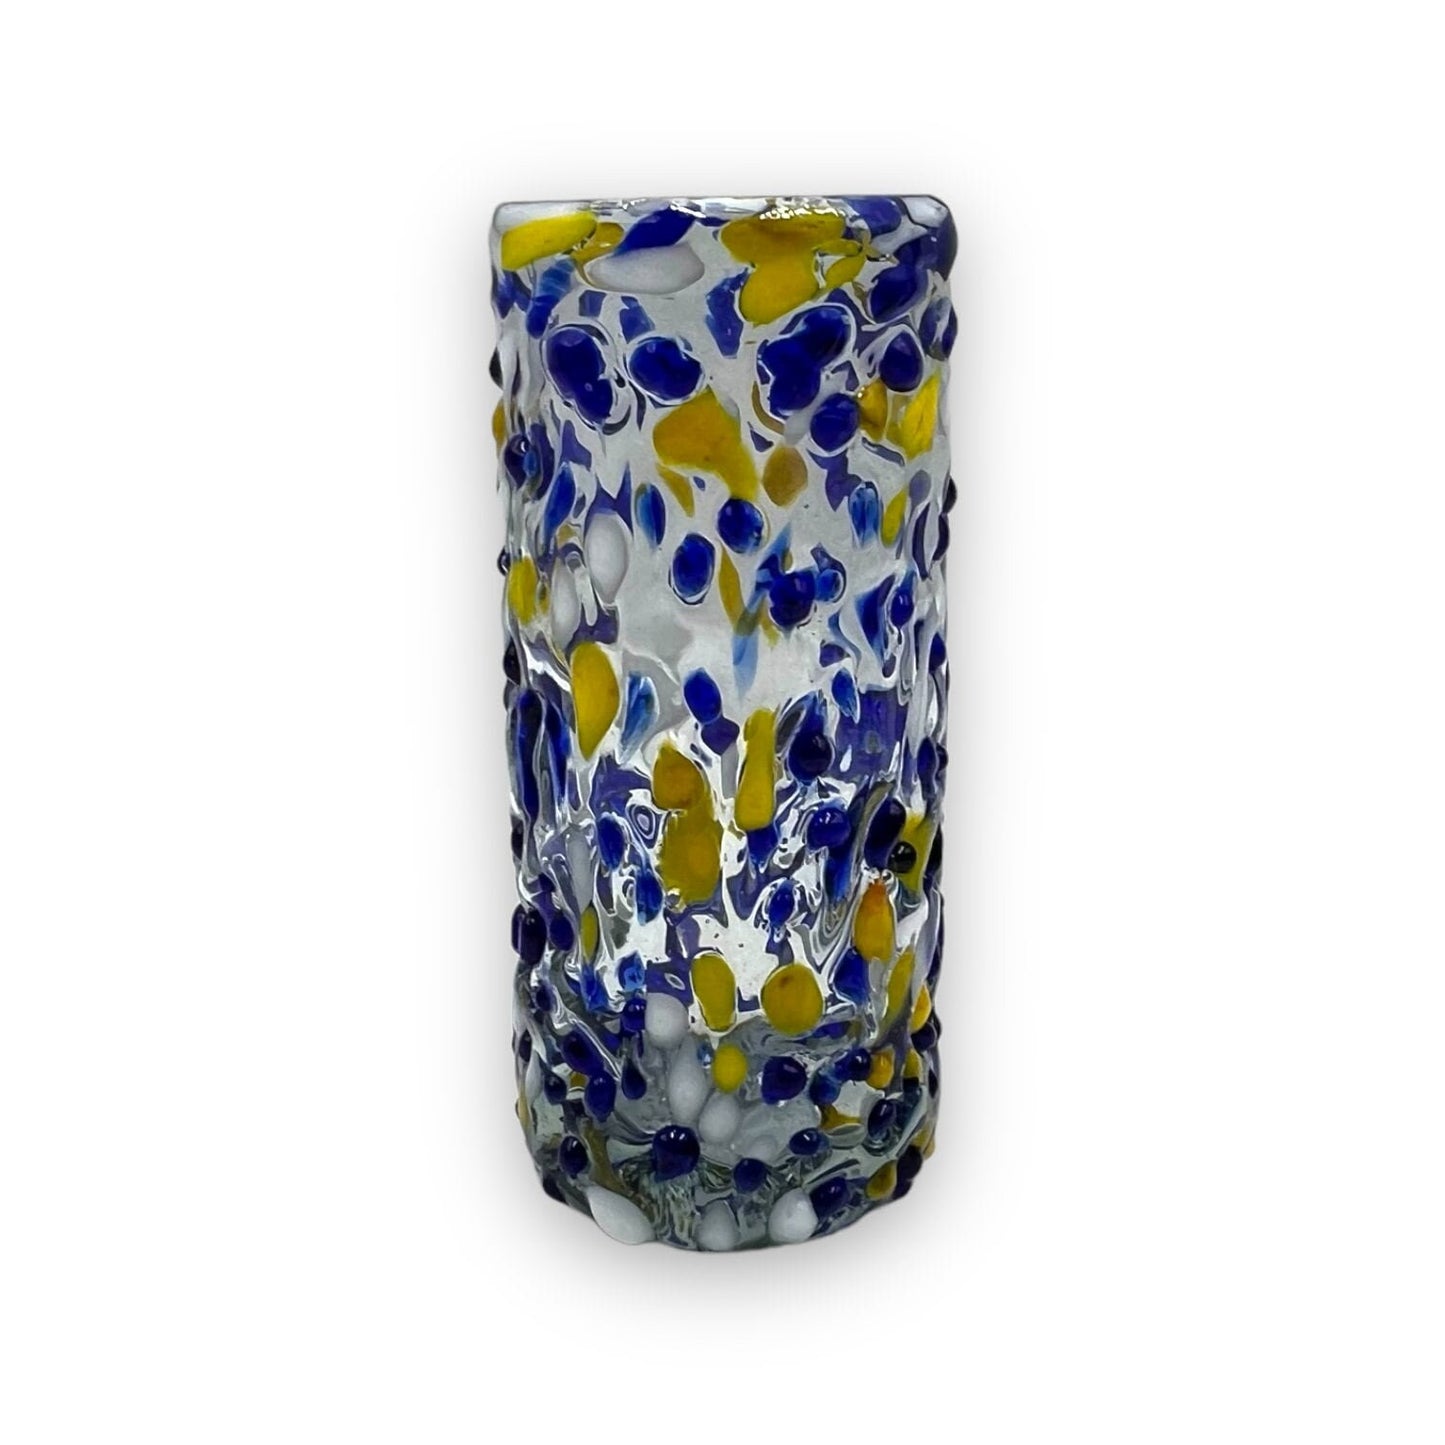 Handcrafted Mexican Double Shot Glass in Blue and Yellow | Artisan Glassware